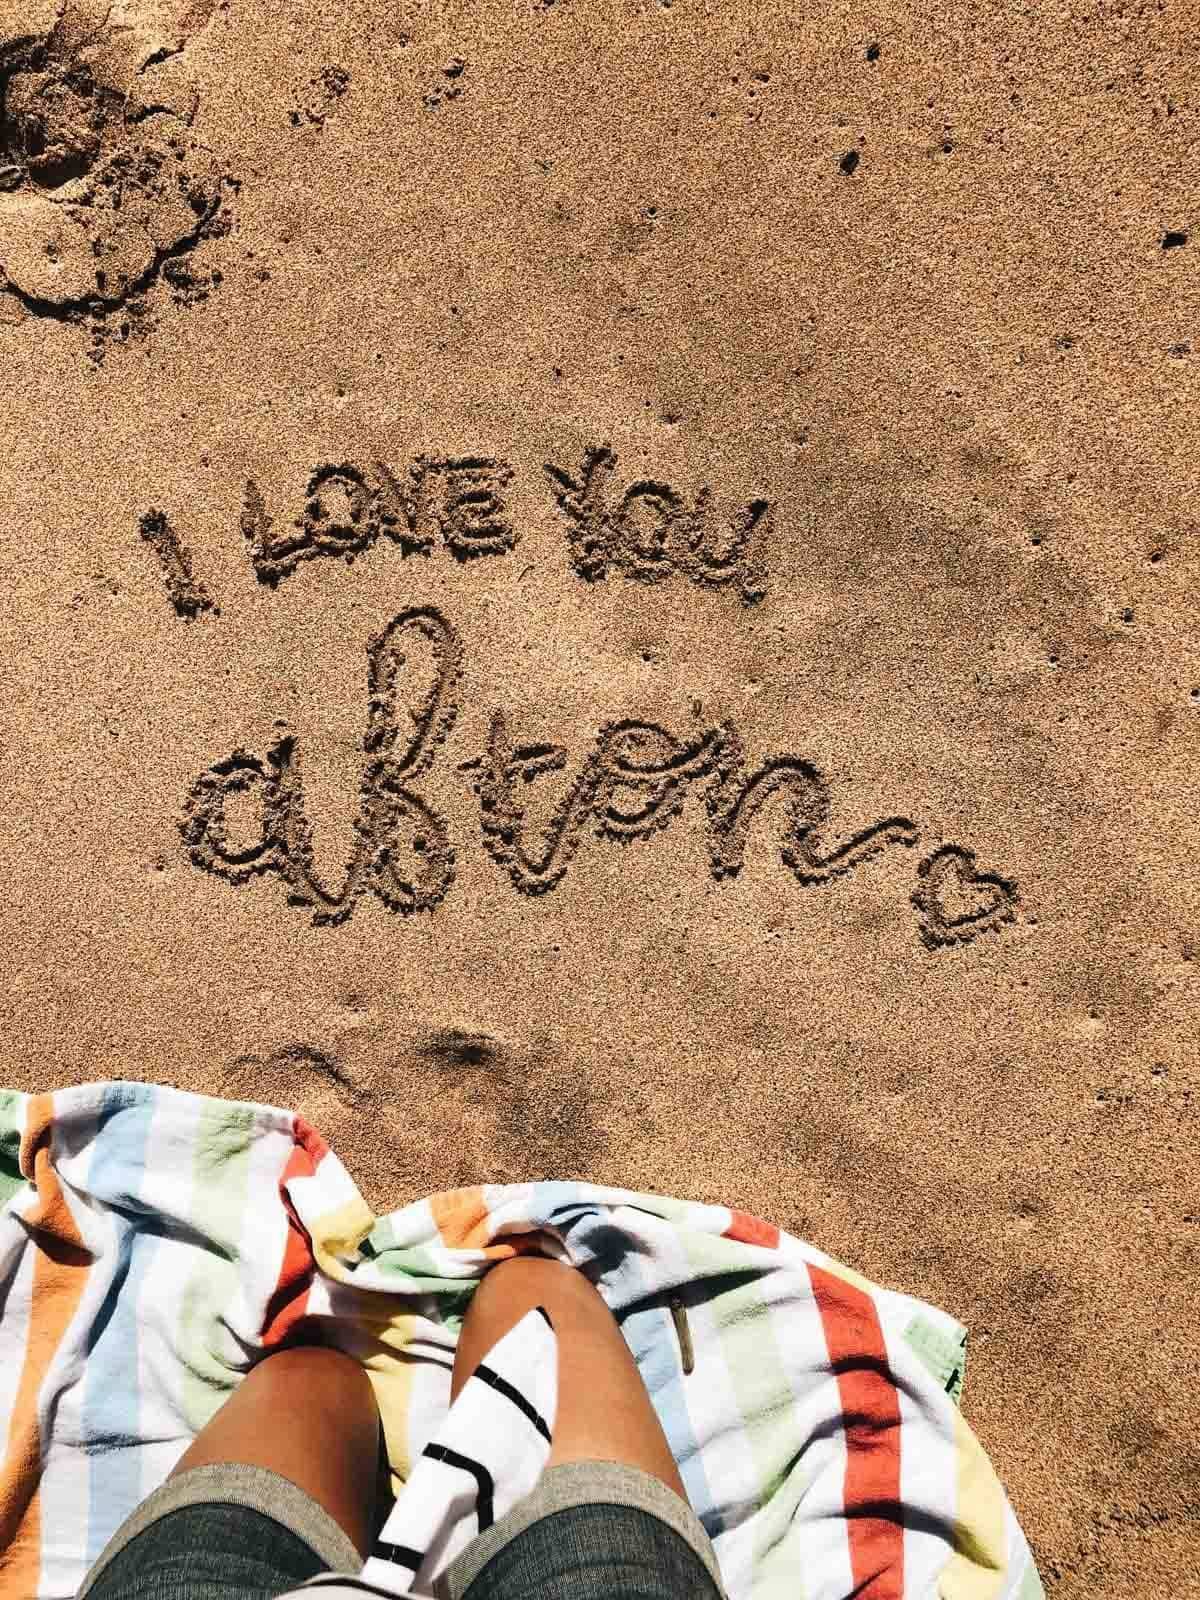 "I love you Afton" in the sand.